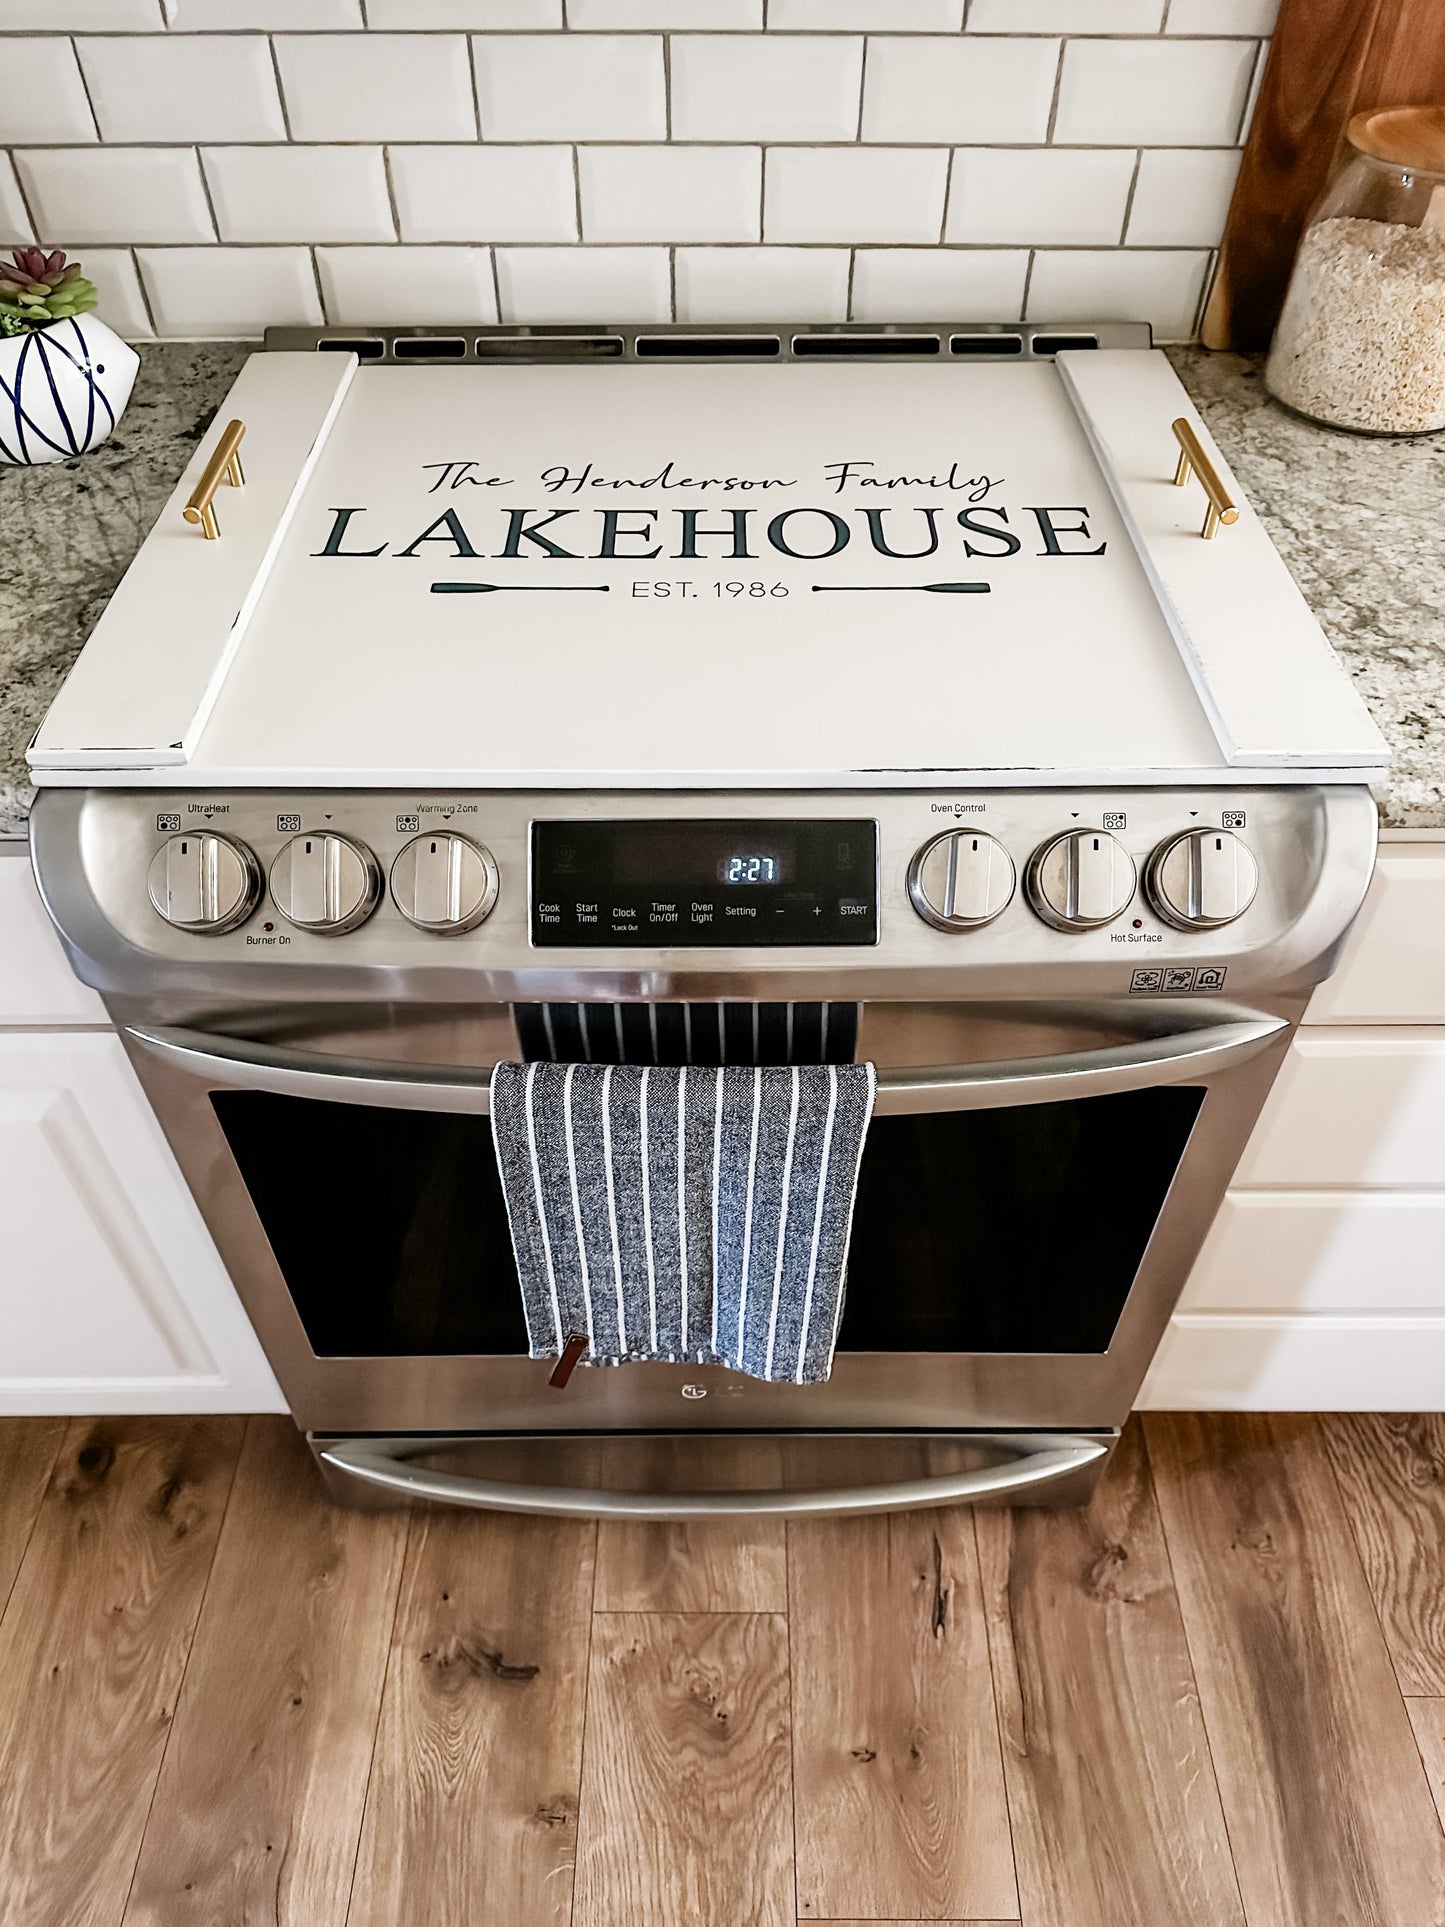 Ivory Distress Personalized Lakehouse Stove Cover